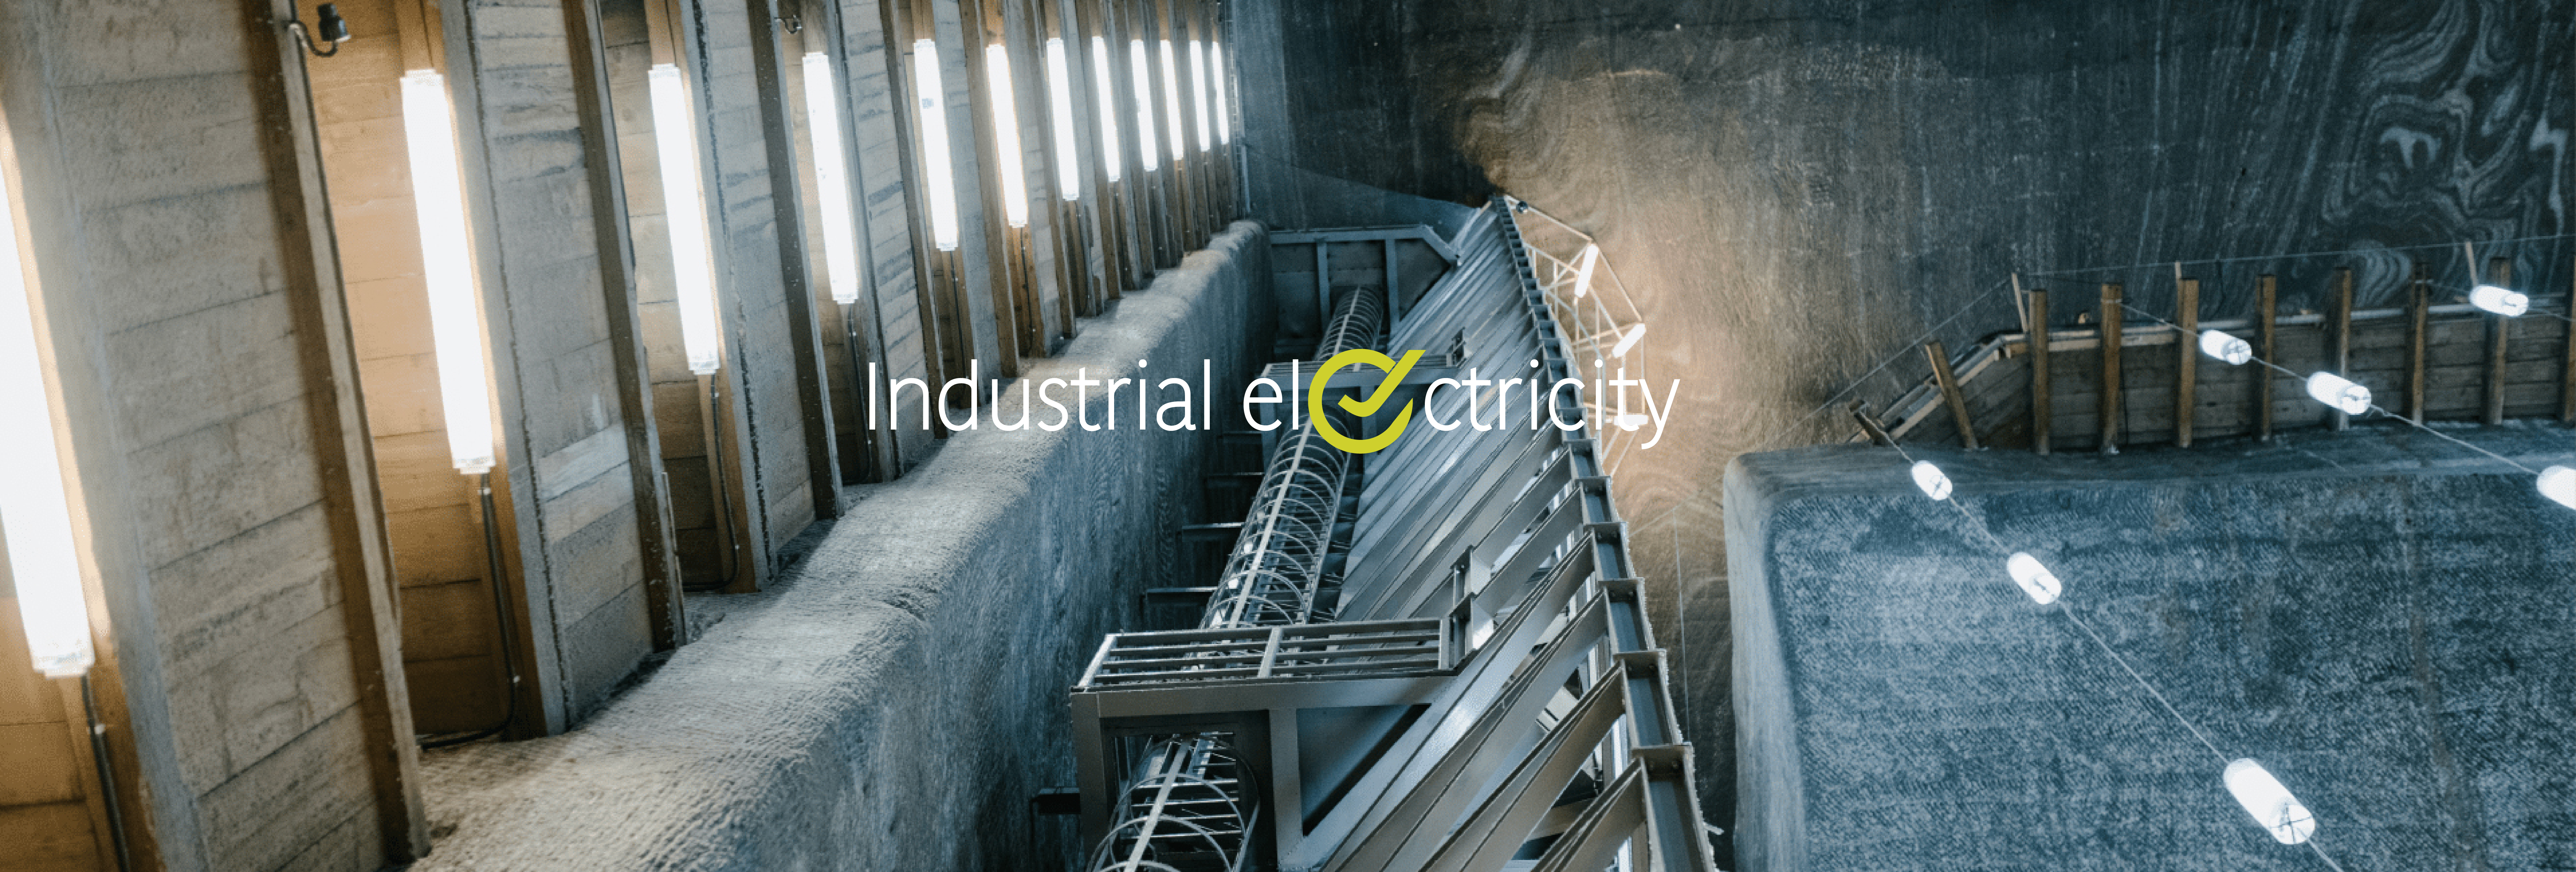 Industrial electricity